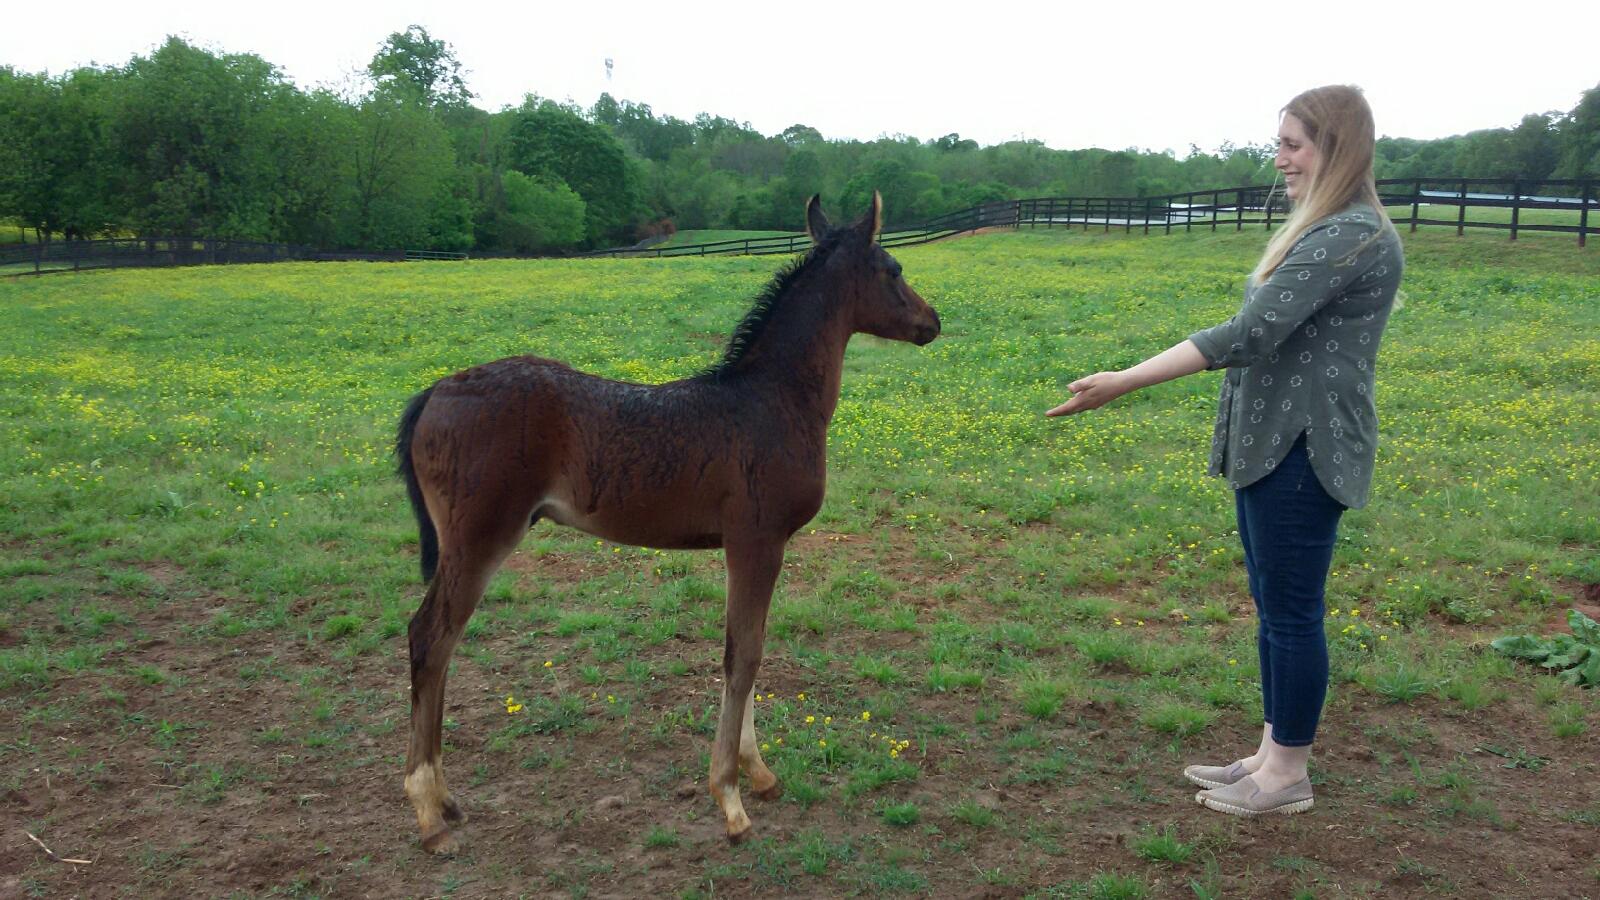 Baby foals are cute too